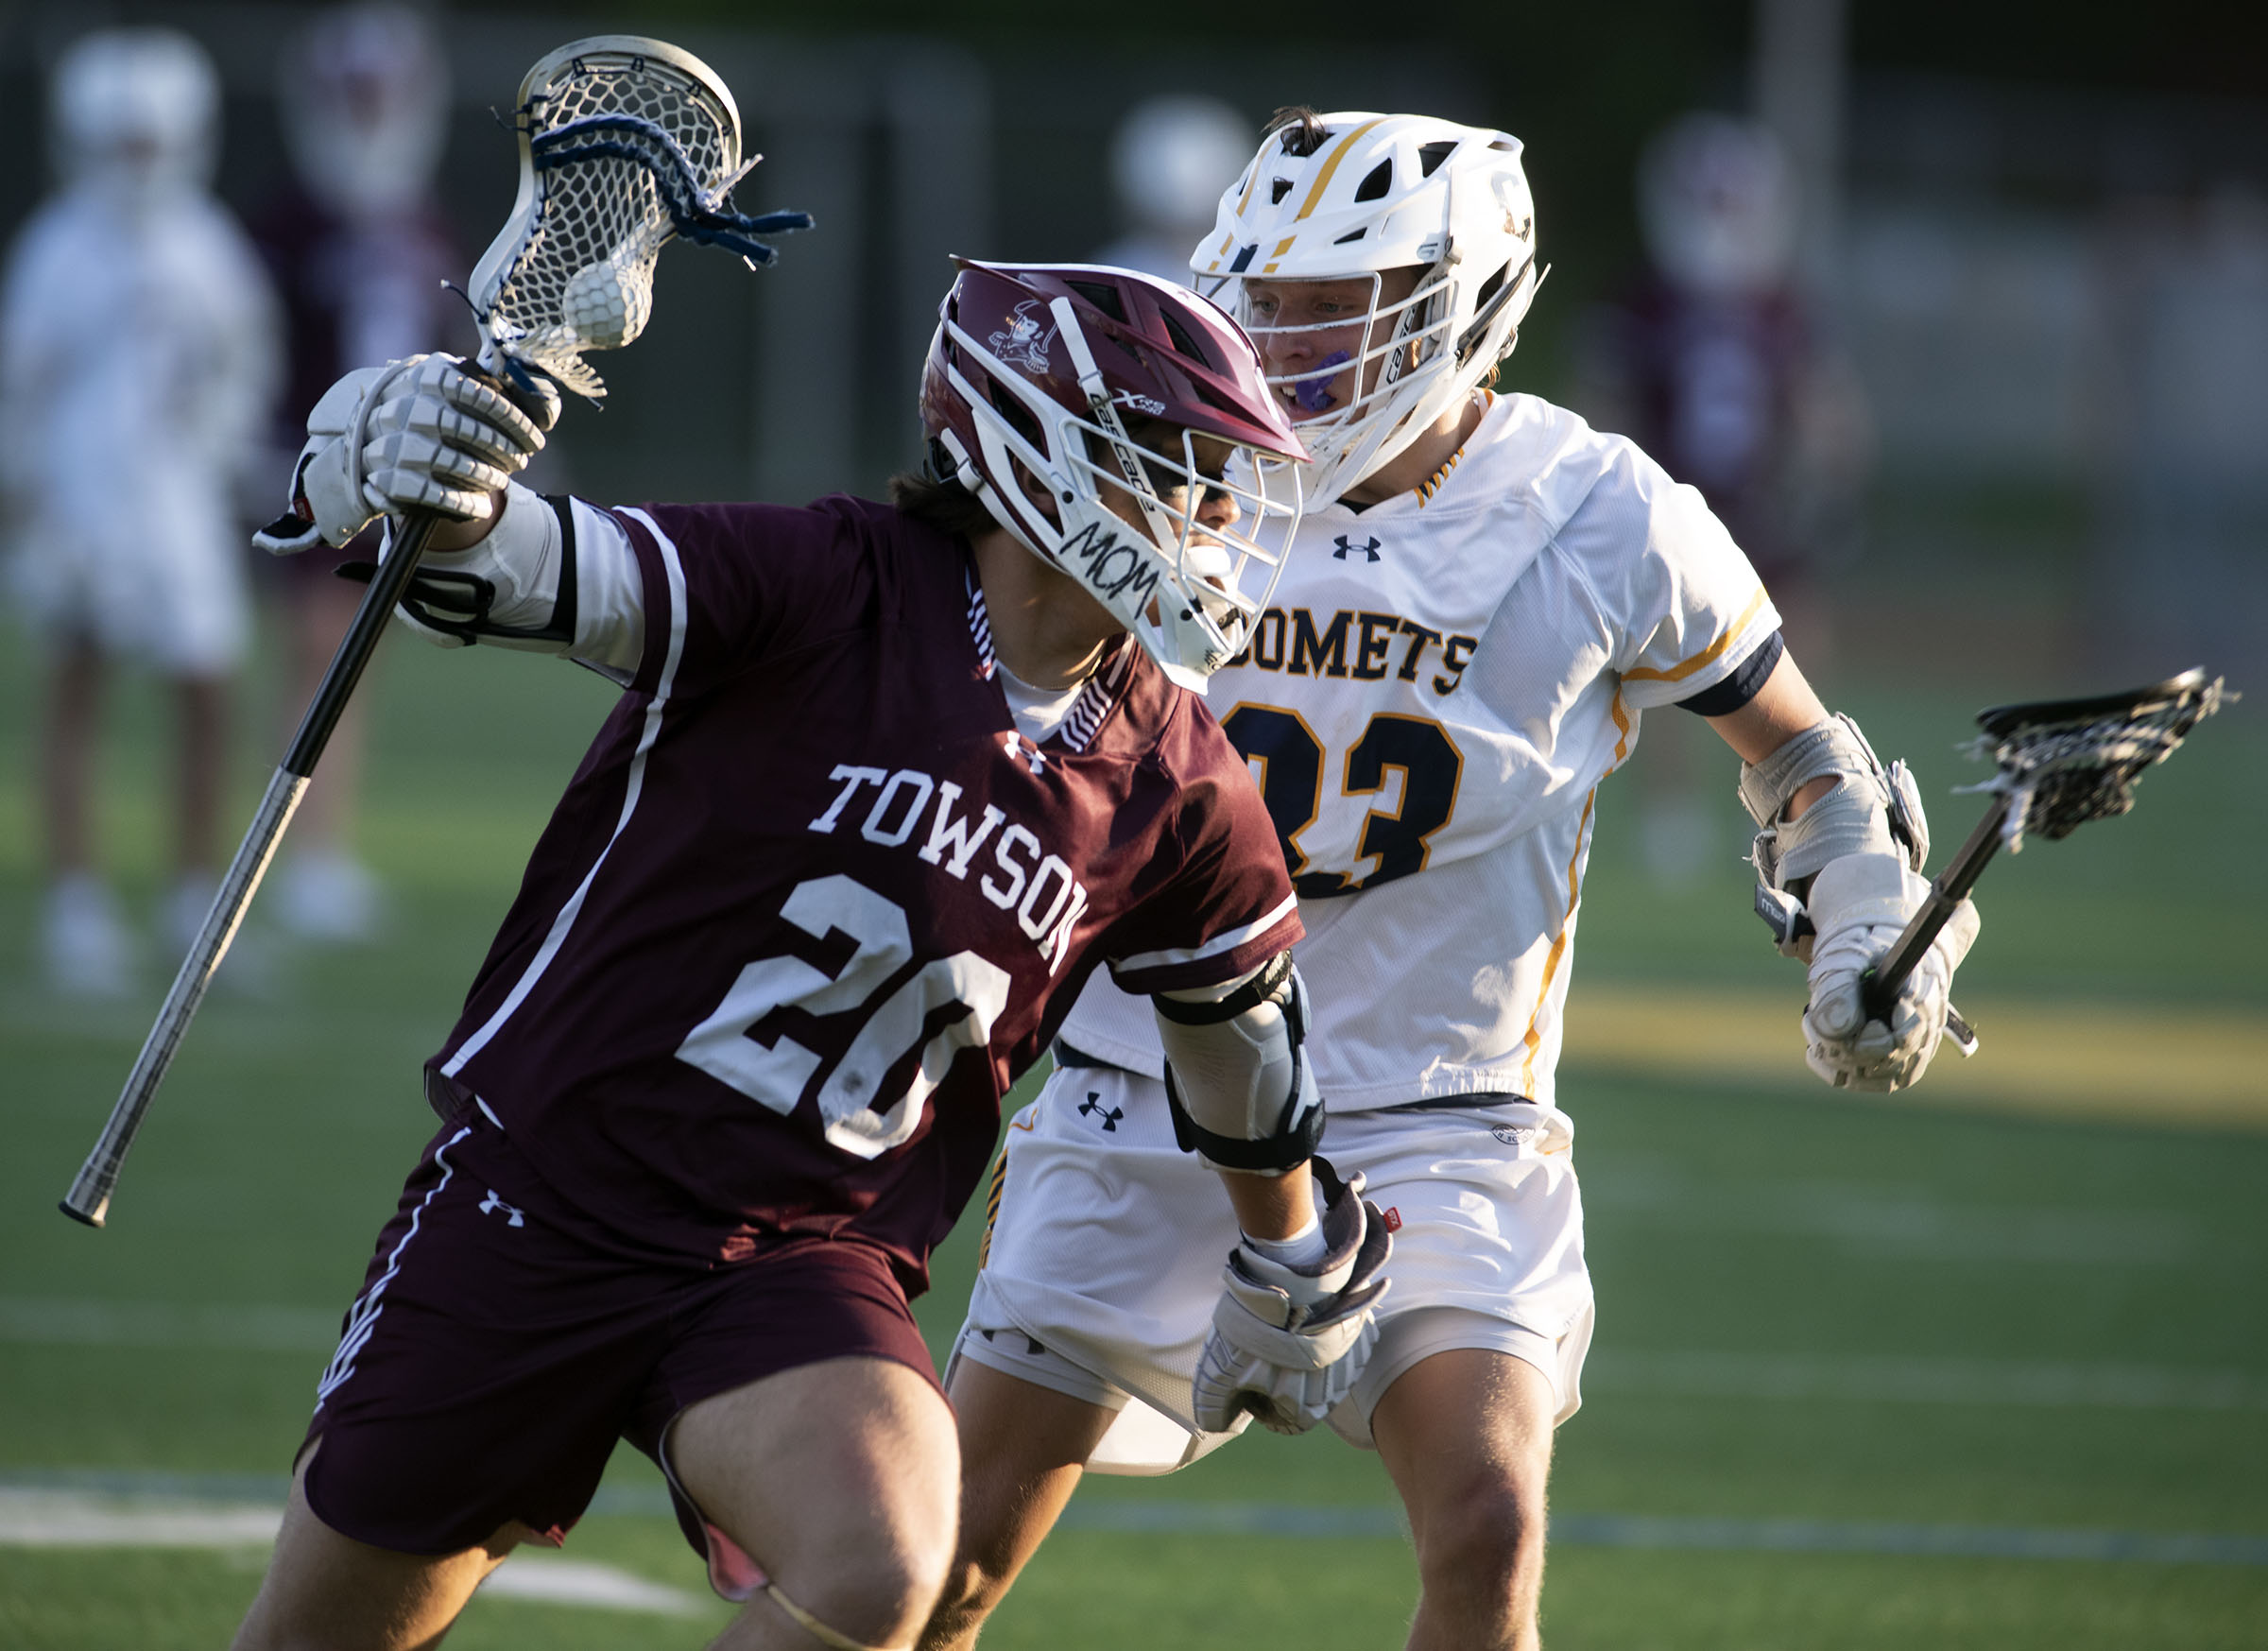 Towson’s Ansen Park, left, moves the ball against Catonsville’s Wade...